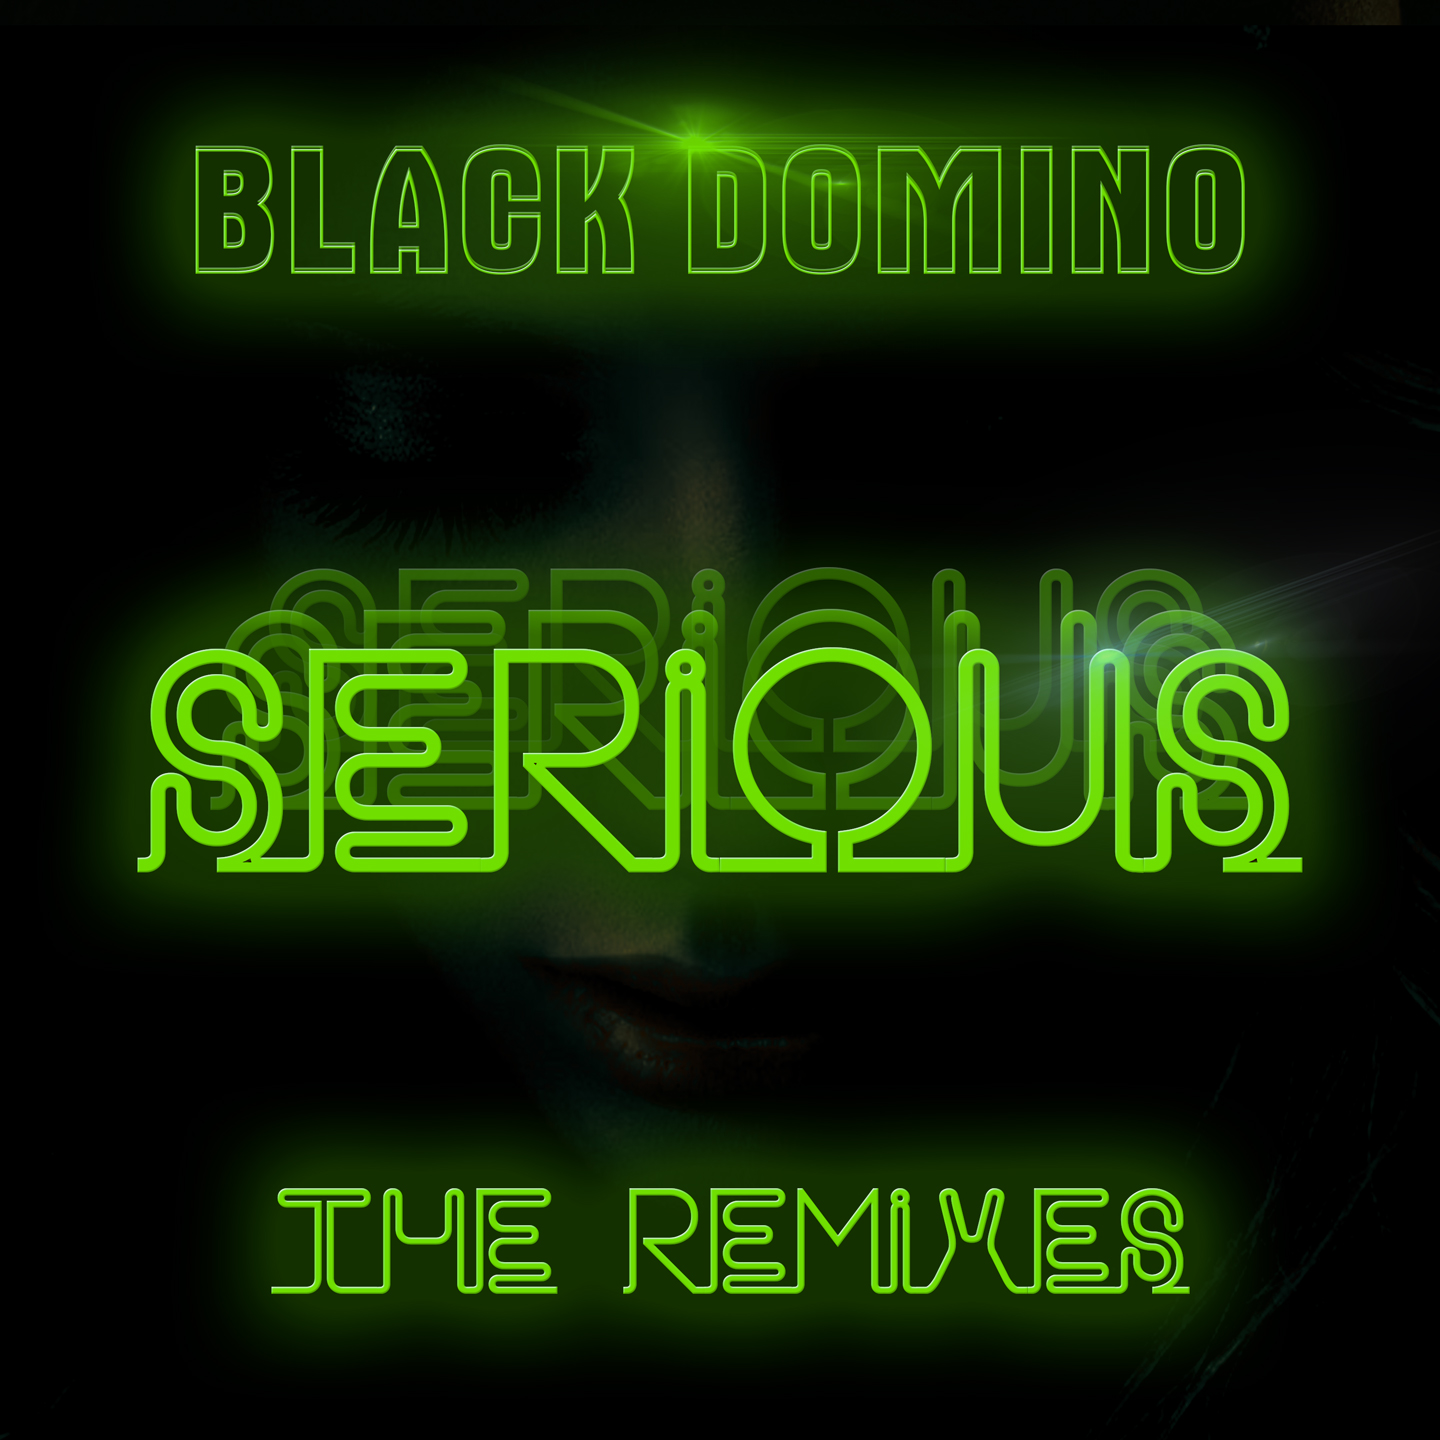 Black Domino - Serious (The Remixes) - Cover Art